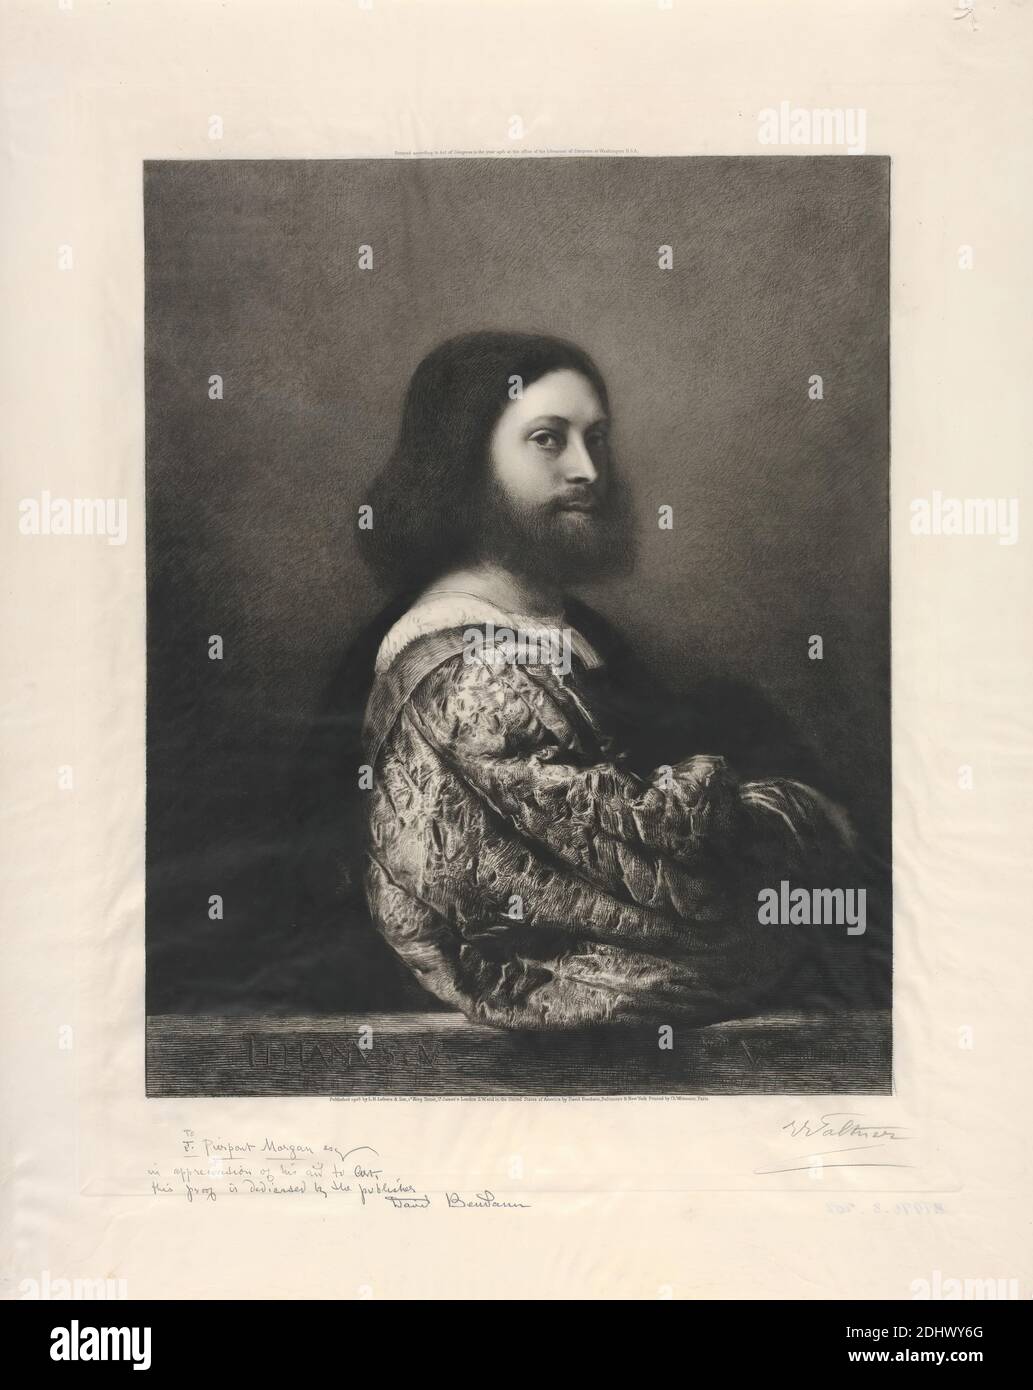 Aretino, Print made by Charles Waltner, ( or ? E. Waltner ), 1846–1925, French, after Titian, 1488/90–1576, Italian, 1905, Etching (artist's proof) on vellum, Sheet: 25 1/16 × 20 inches (63.7 × 50.8 cm), Plate: 21 1/8 × 16 15/16 inches (53.7 × 43 cm), and Image: 17 15/16 × 14 1/4 inches (45.6 × 36.2 cm Stock Photo